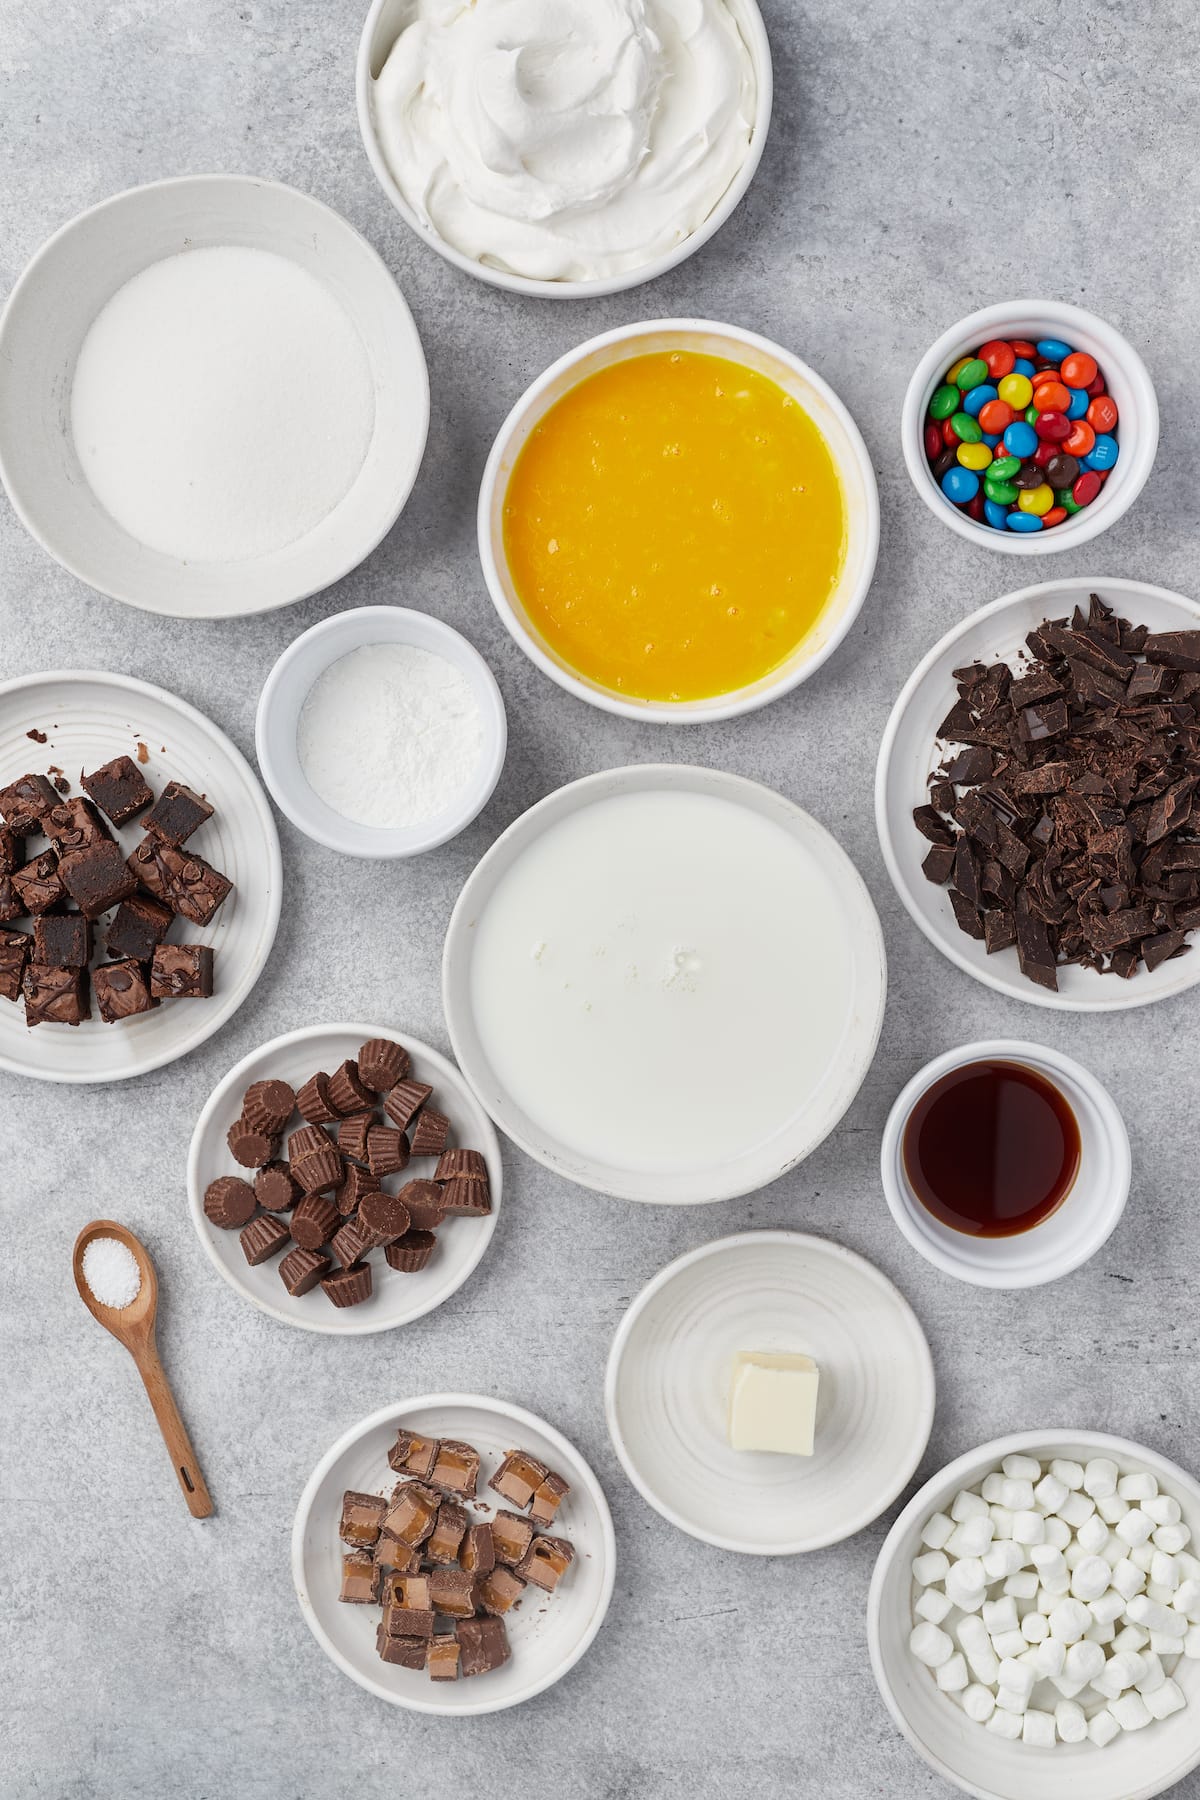 The ingredients for chocolate pudding candy pie.